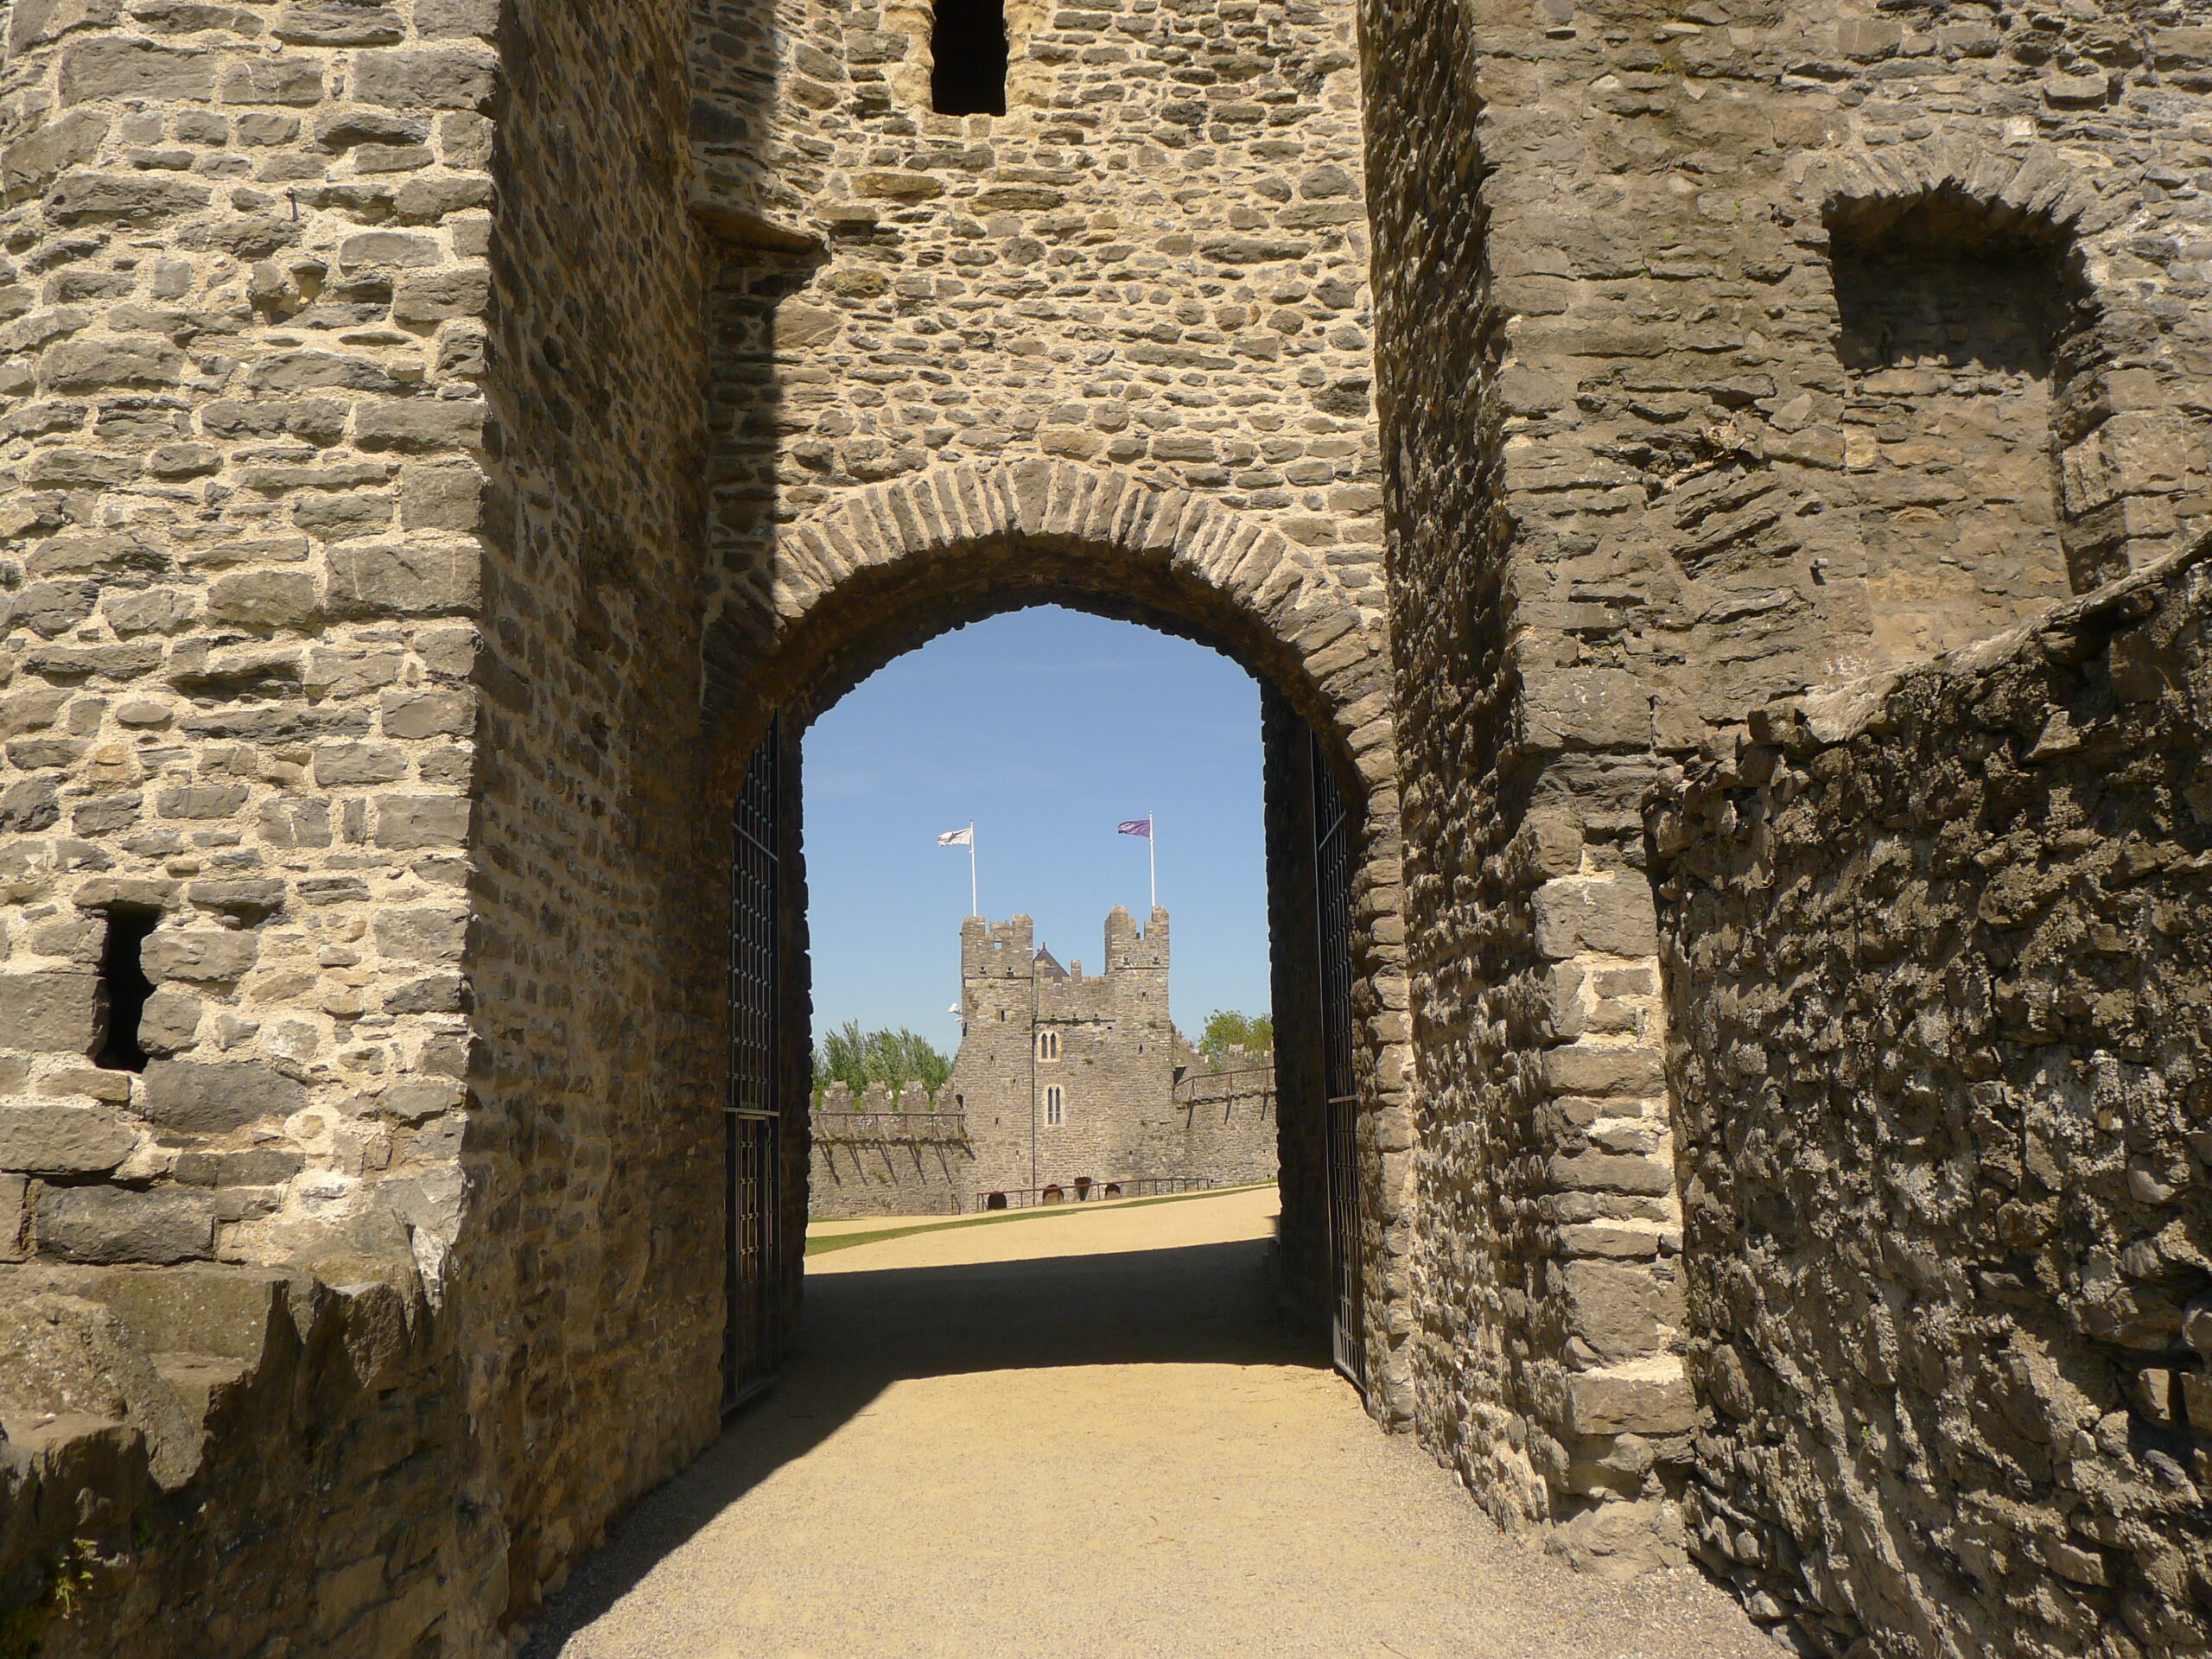 Entrance gate of medieval castle with Constables Tower in background